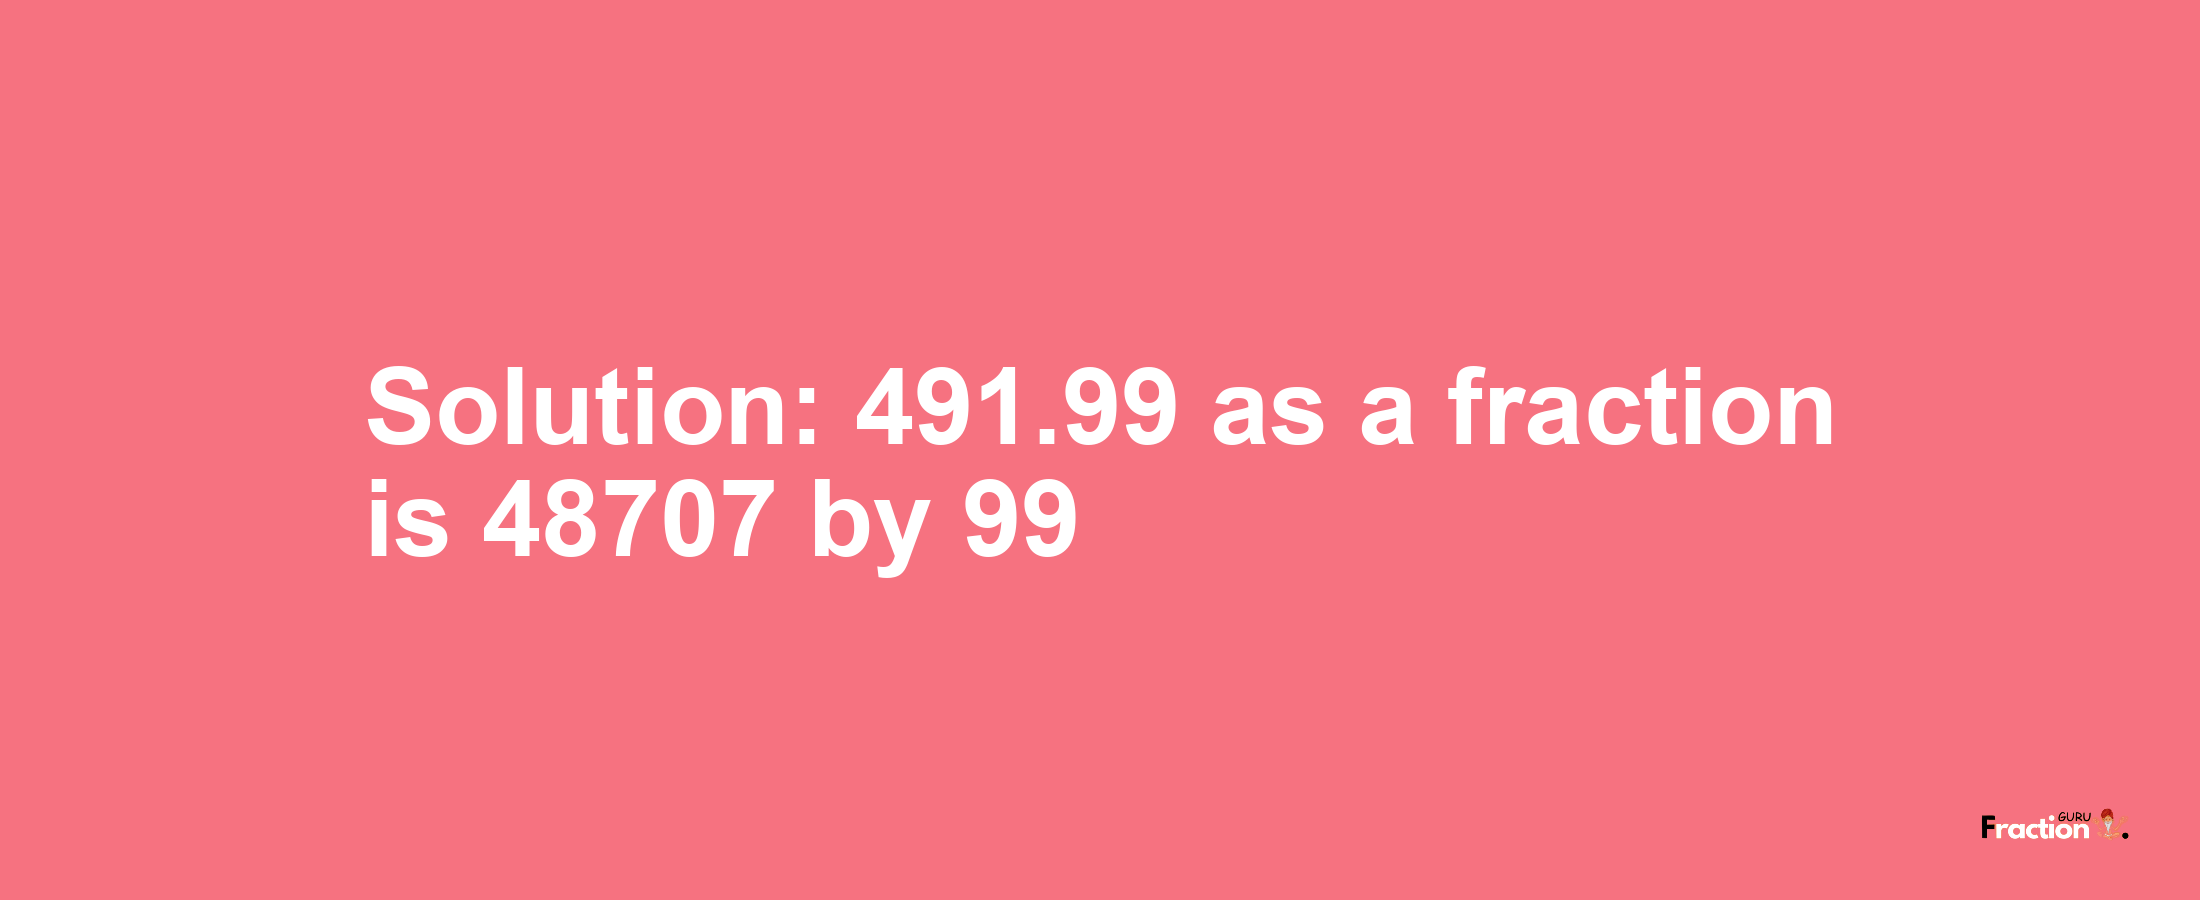 Solution:491.99 as a fraction is 48707/99